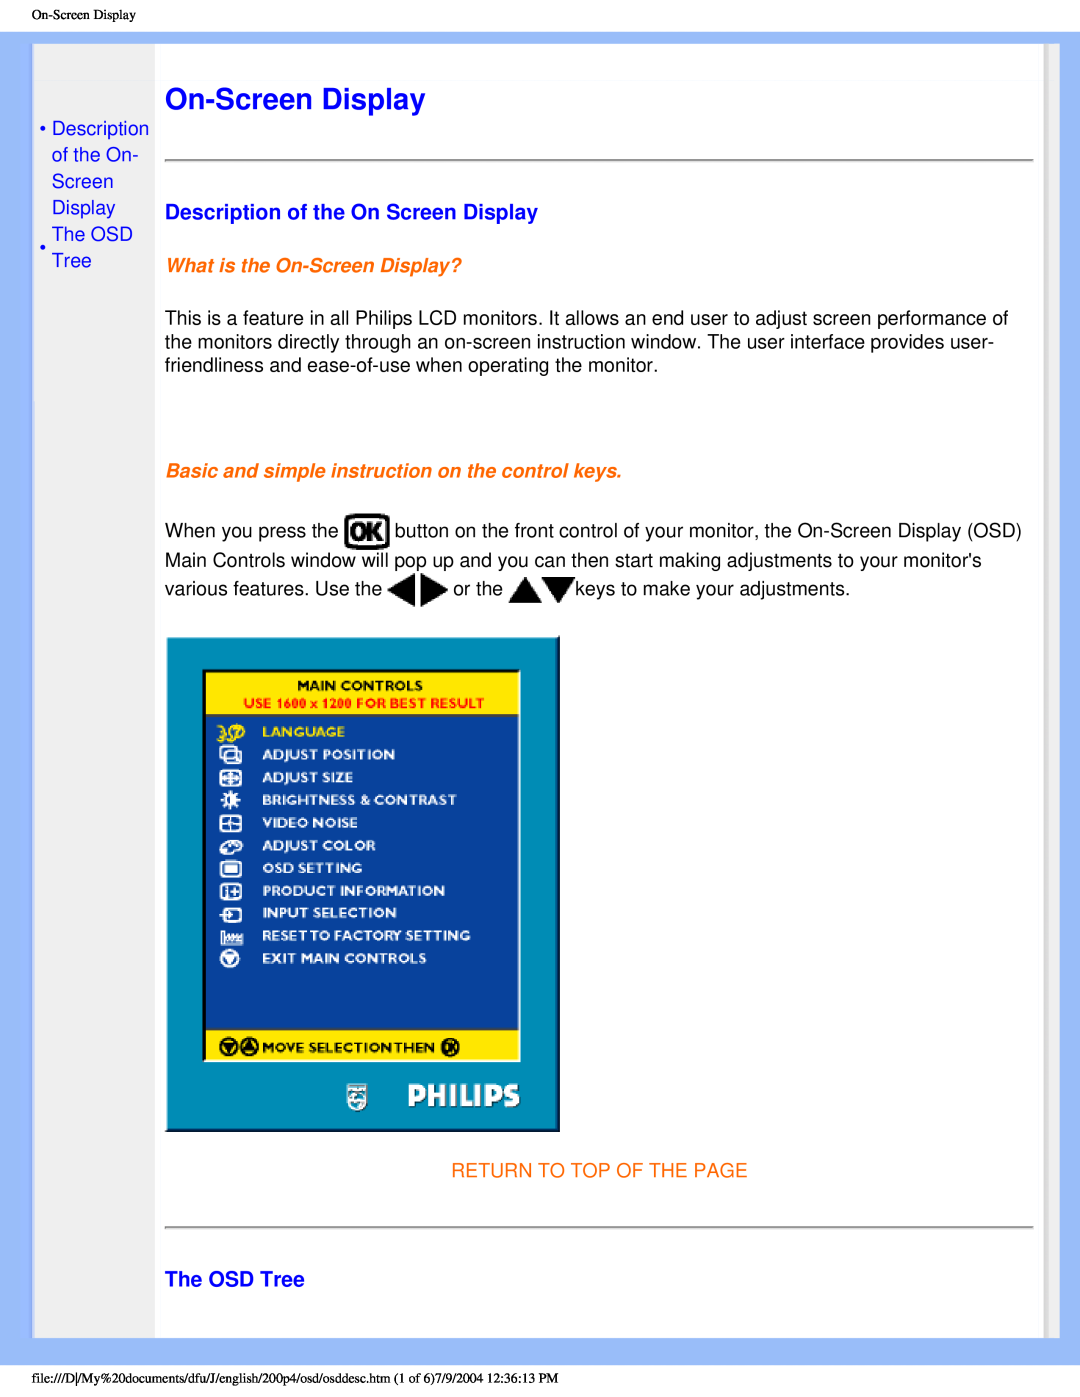 Philips 200S4 On-ScreenDisplay, Description of the On Screen Display, The OSD Tree, Description of the On- Screen Display 